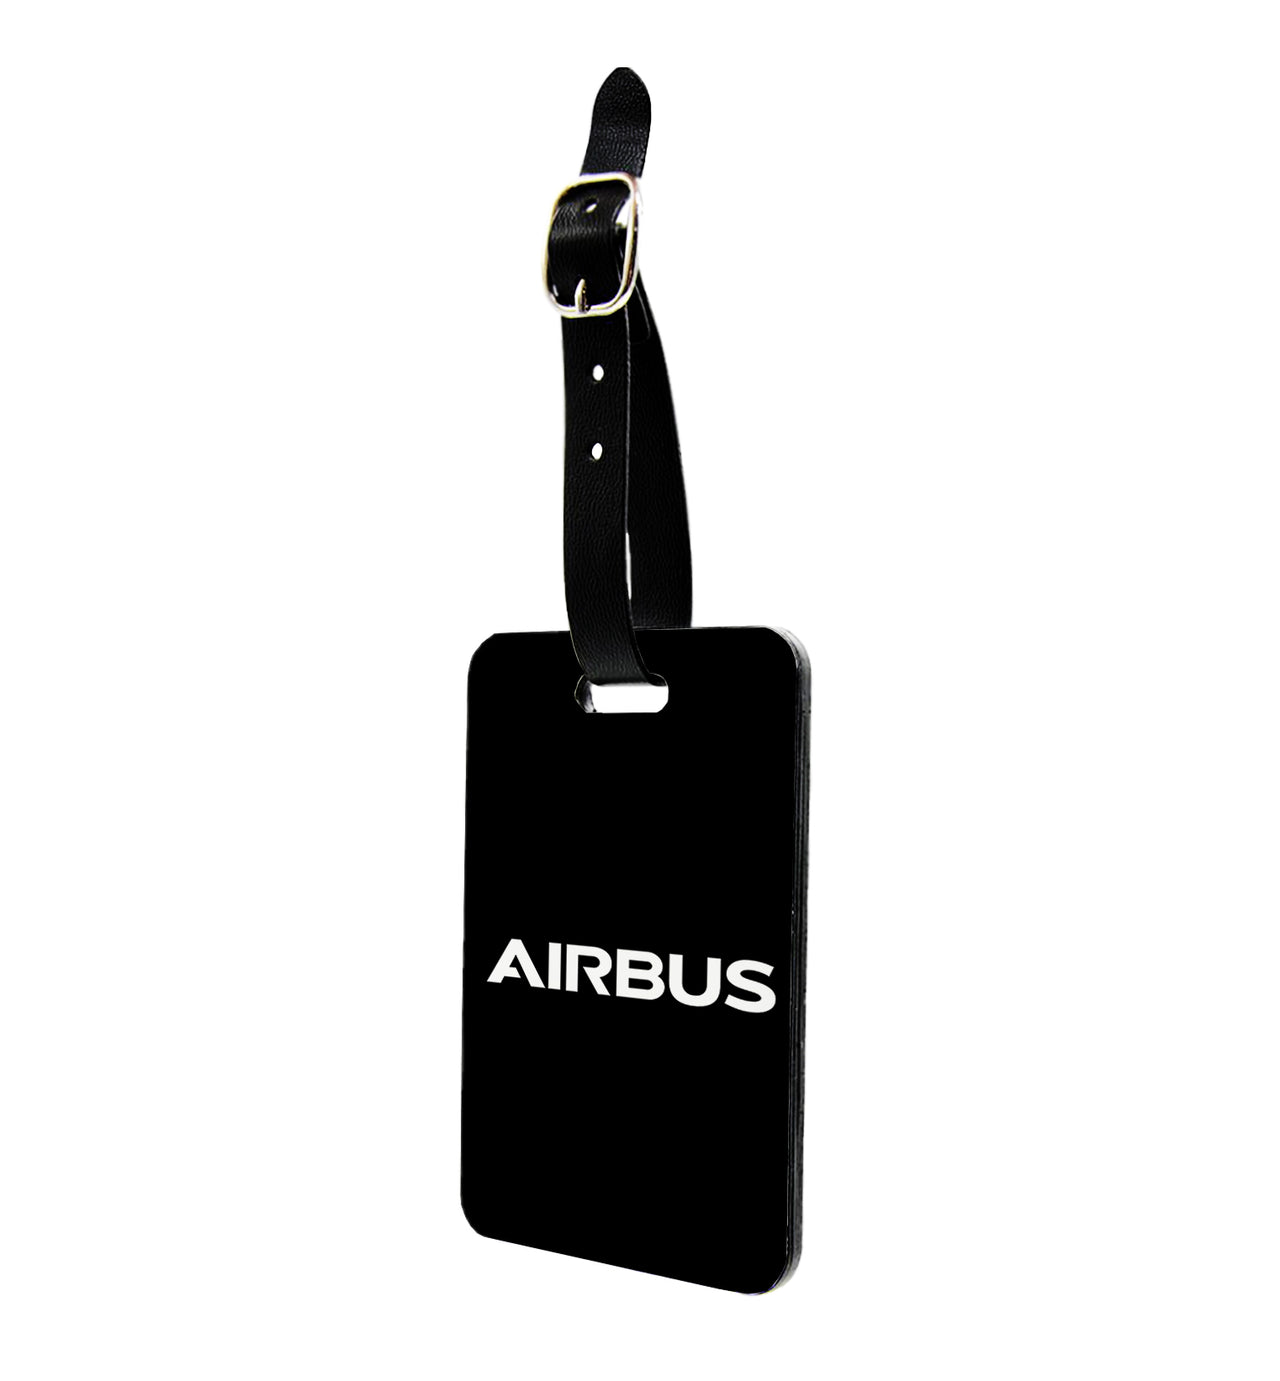 Airbus & Text Designed Luggage Tag